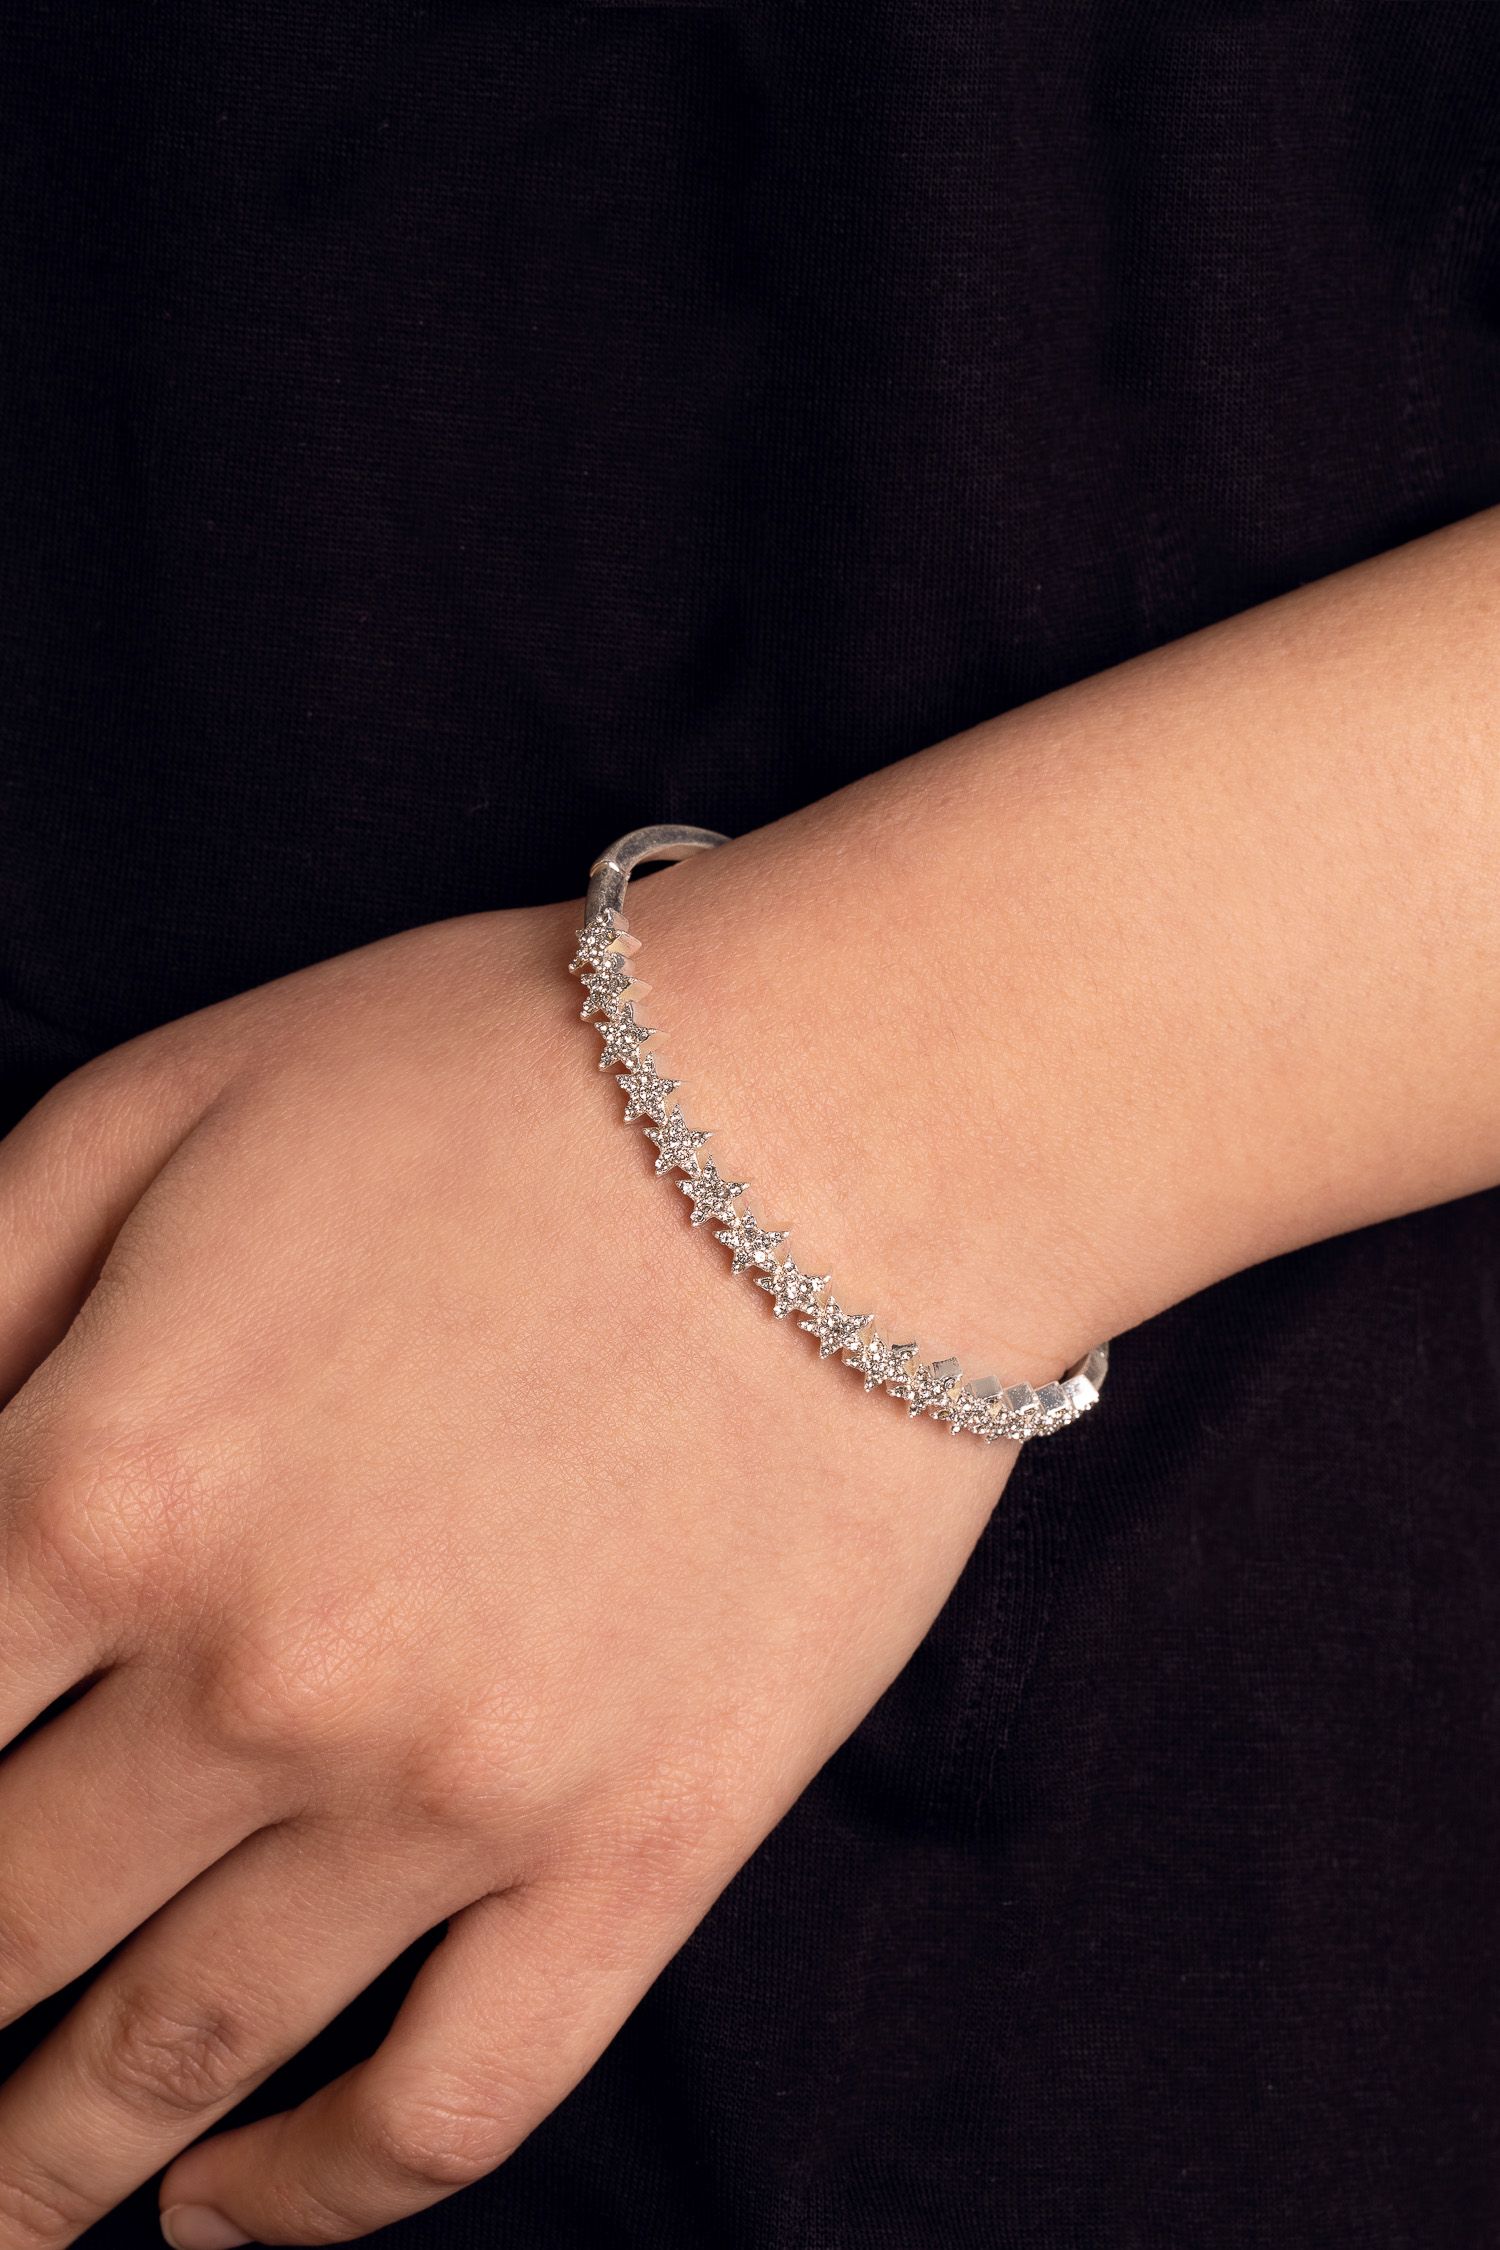 The Kate Thornton Silver Plated Delicate Star Sparkly Bracelet adorned with pave crystals is a show stopping piece to add a touch of glamour to your look day through to night. The delicate star has a hinge fastening that makes it easy and comfortable to wear, no matter where you're headed so make your everyday outfit more special with a little bit of sparkle from this pretty bracelet. The silver tone bracelet dimensions are 6cm x 5cm and features a hinge fastening which you simply press in lightly and open up.  Presented in a KTx jewellery pouch to keep your jewellery safe or ideal for gifting!